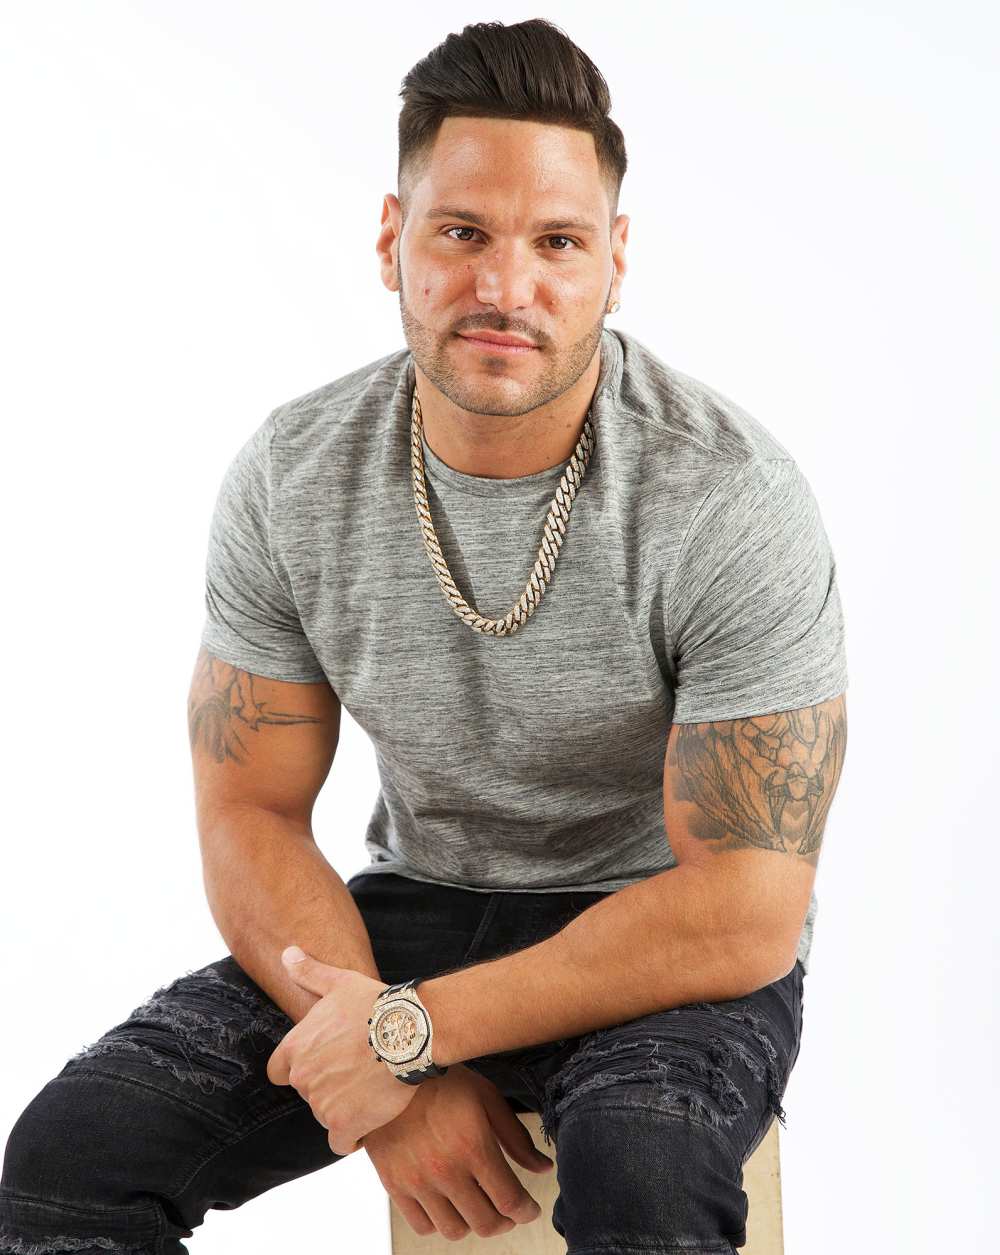 Ronnie Ortiz-Magro Opened Up About His Sobriety Hours Before His Arrest